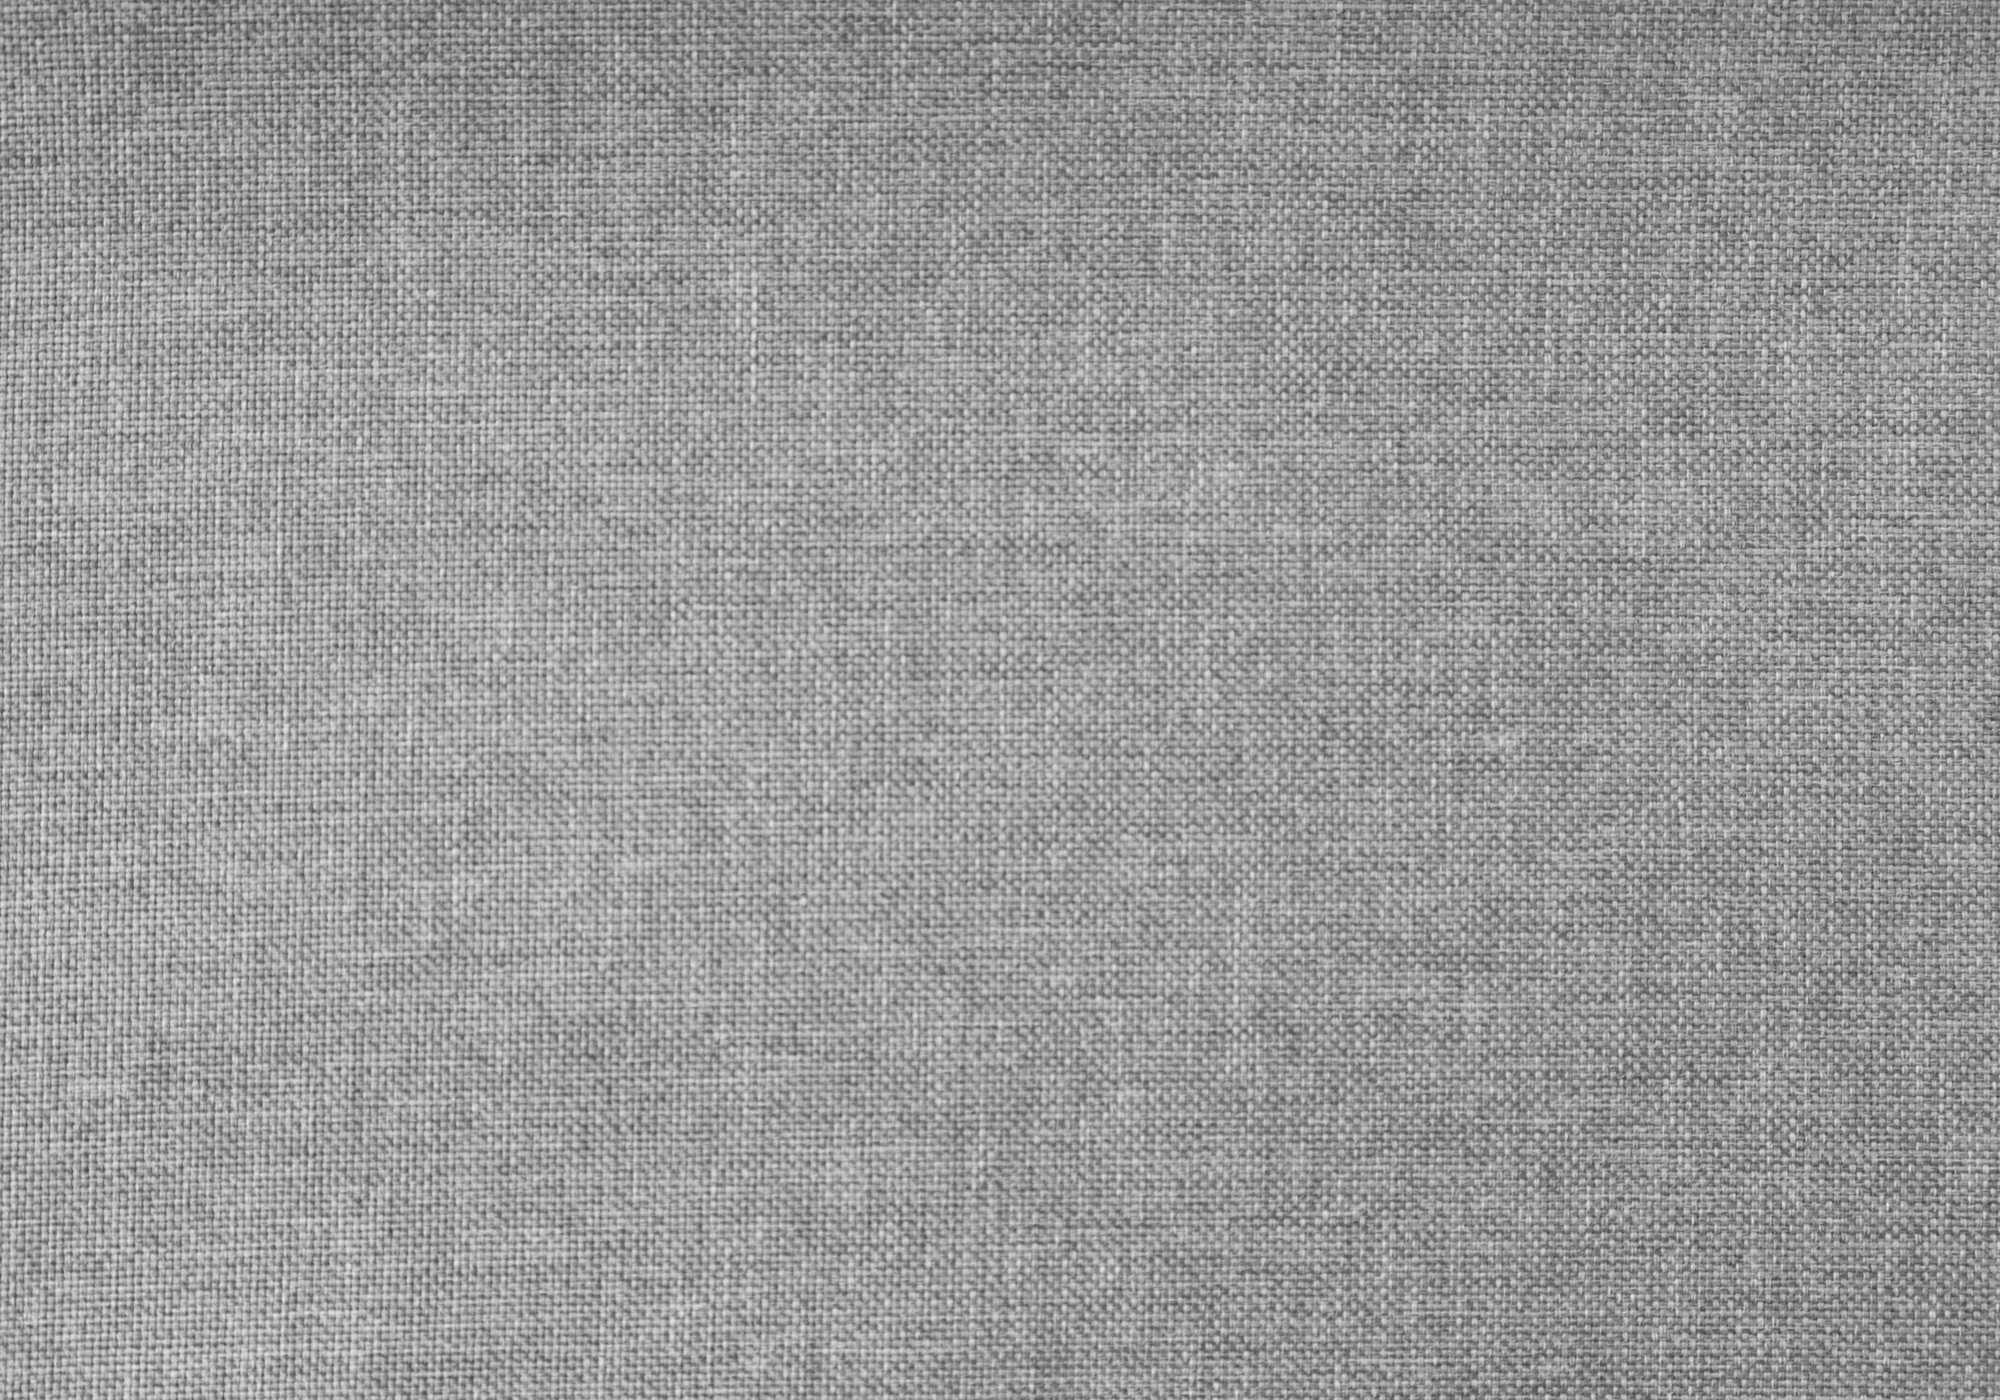 45.25" x 82.75" x 49.75" Grey Linen With Chrome Trim - Twin Size Bed Default Title